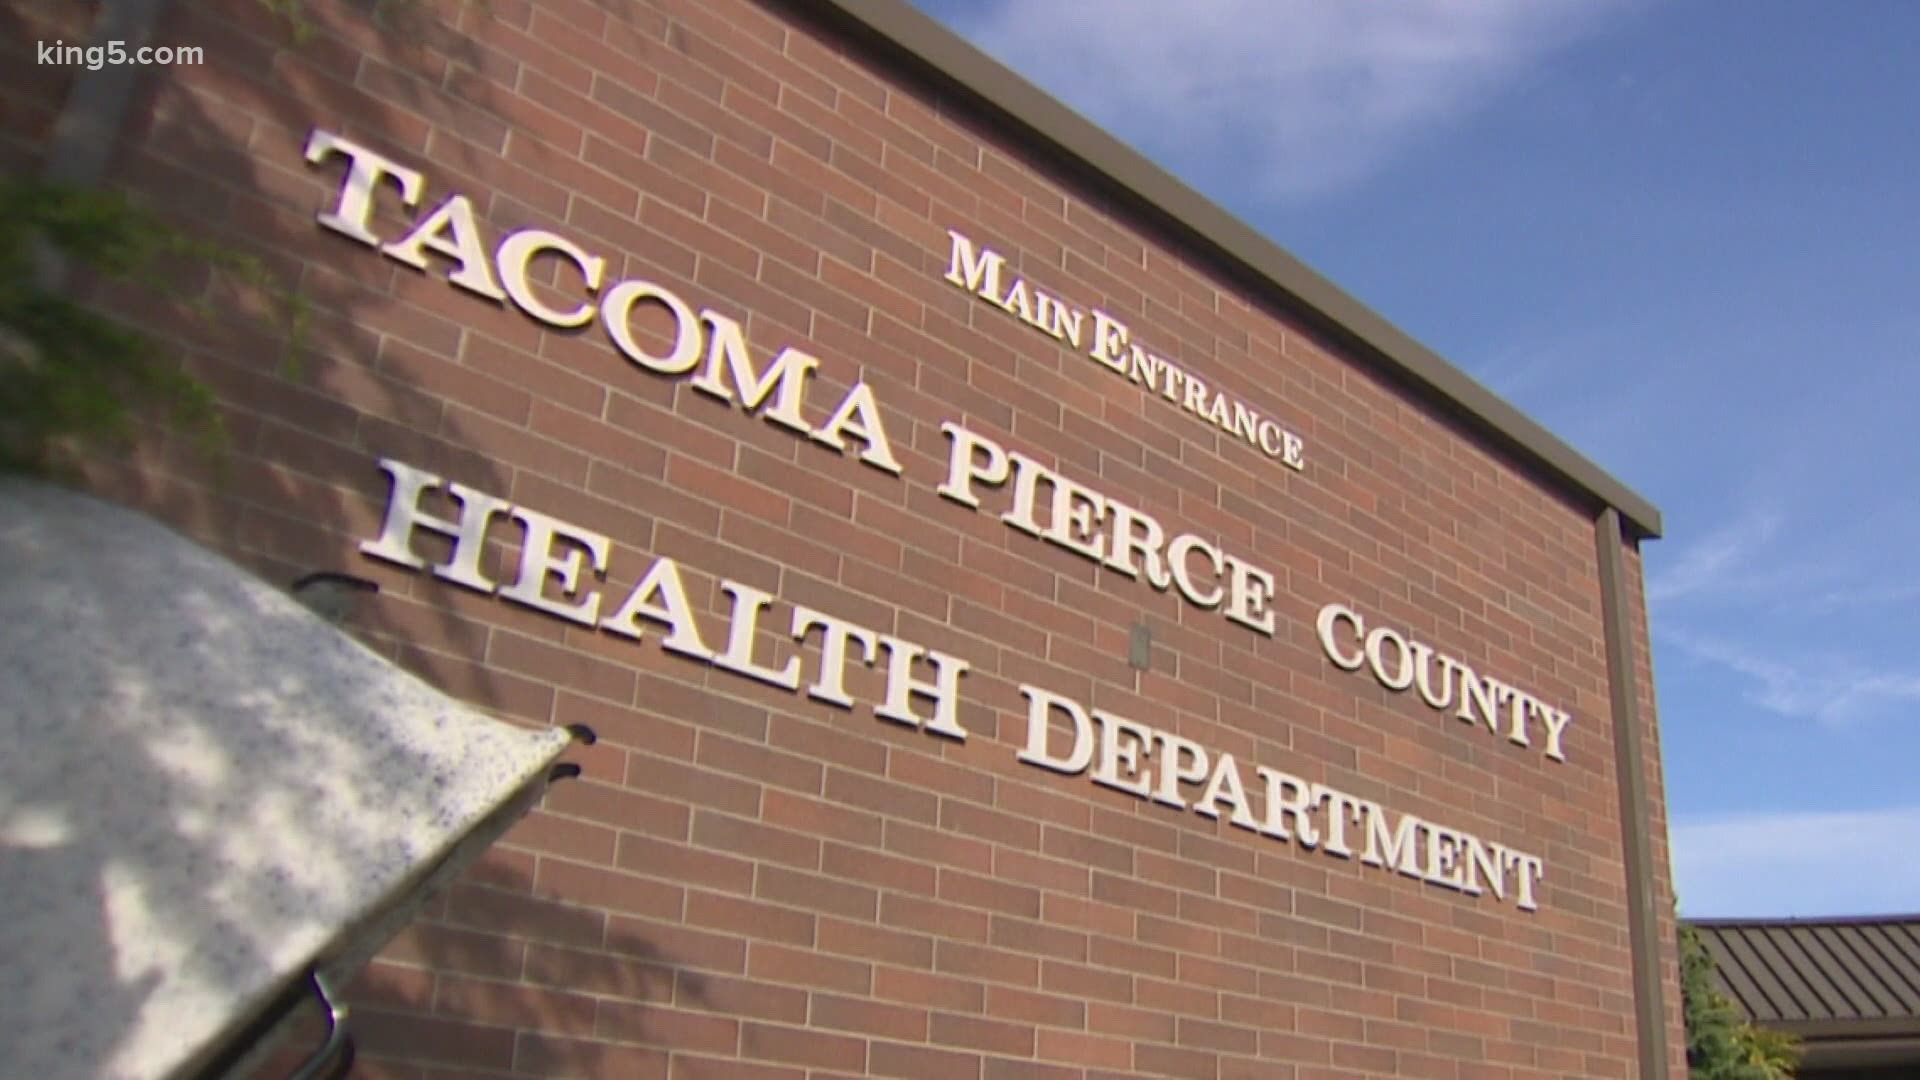 The Pierce County Council voted on a plan despite a proclaimation from the Governor to stop it.